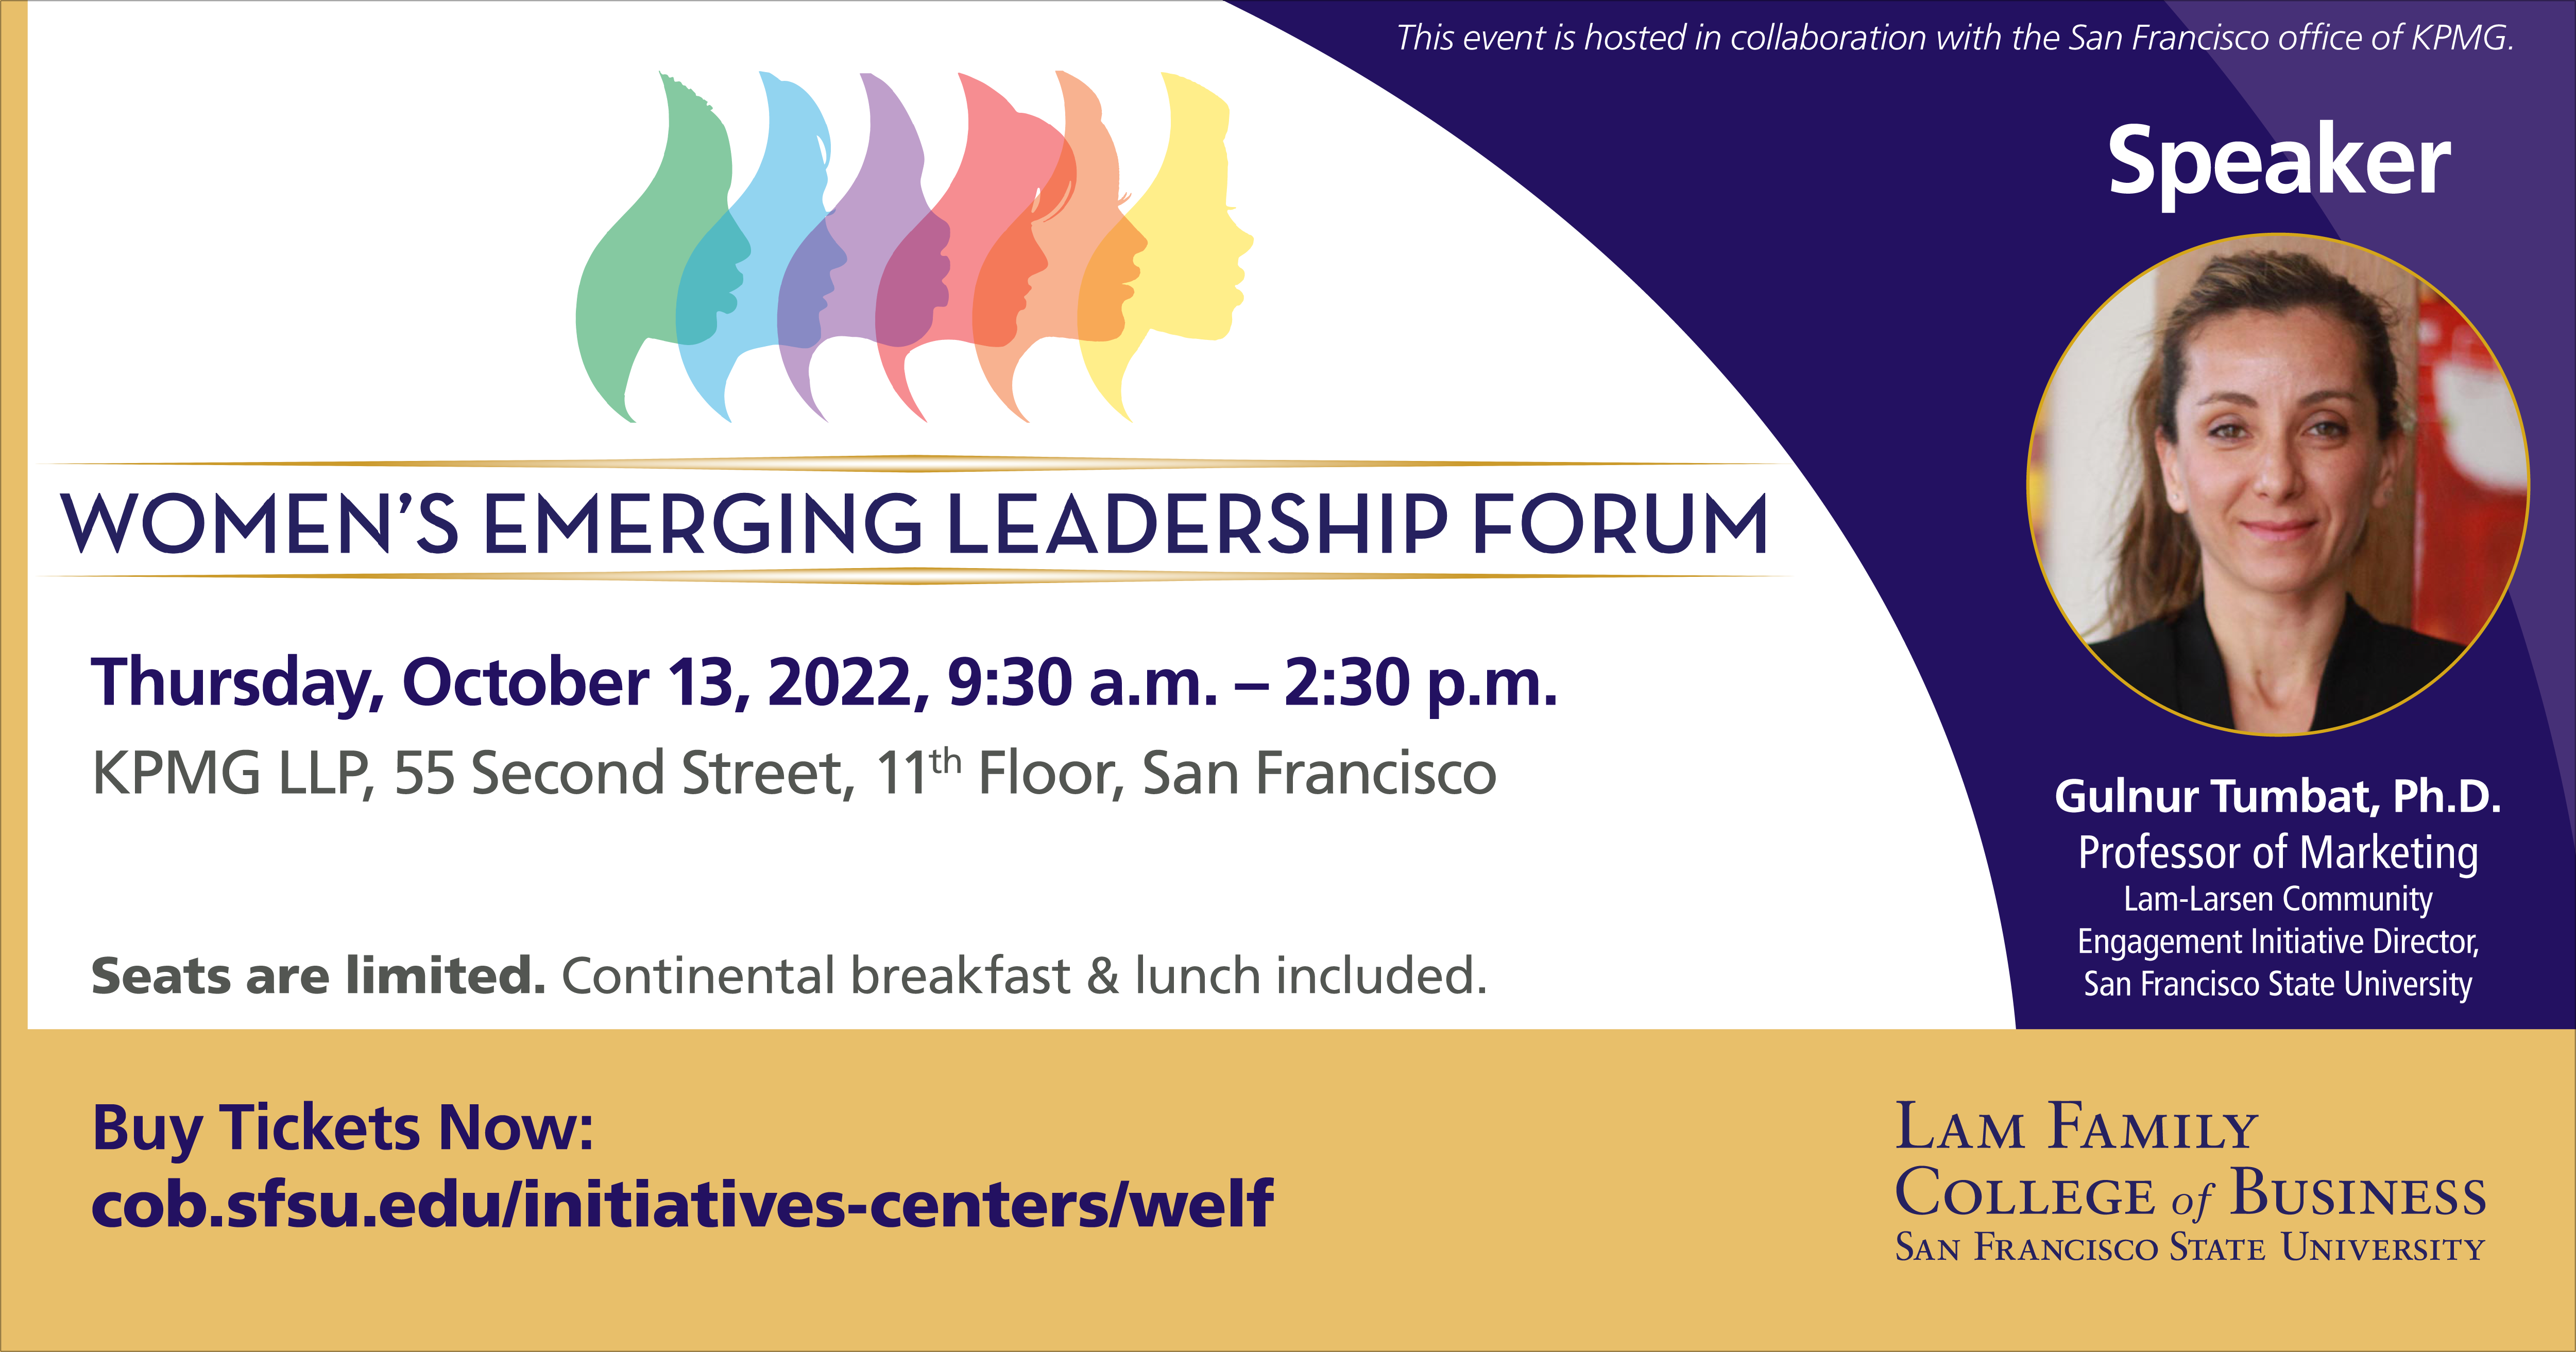 Advertisement for the Women's Emerging Leadership Forum with Speaker Gulnur Tumbat, Ph.D., to be held October 13, 2022